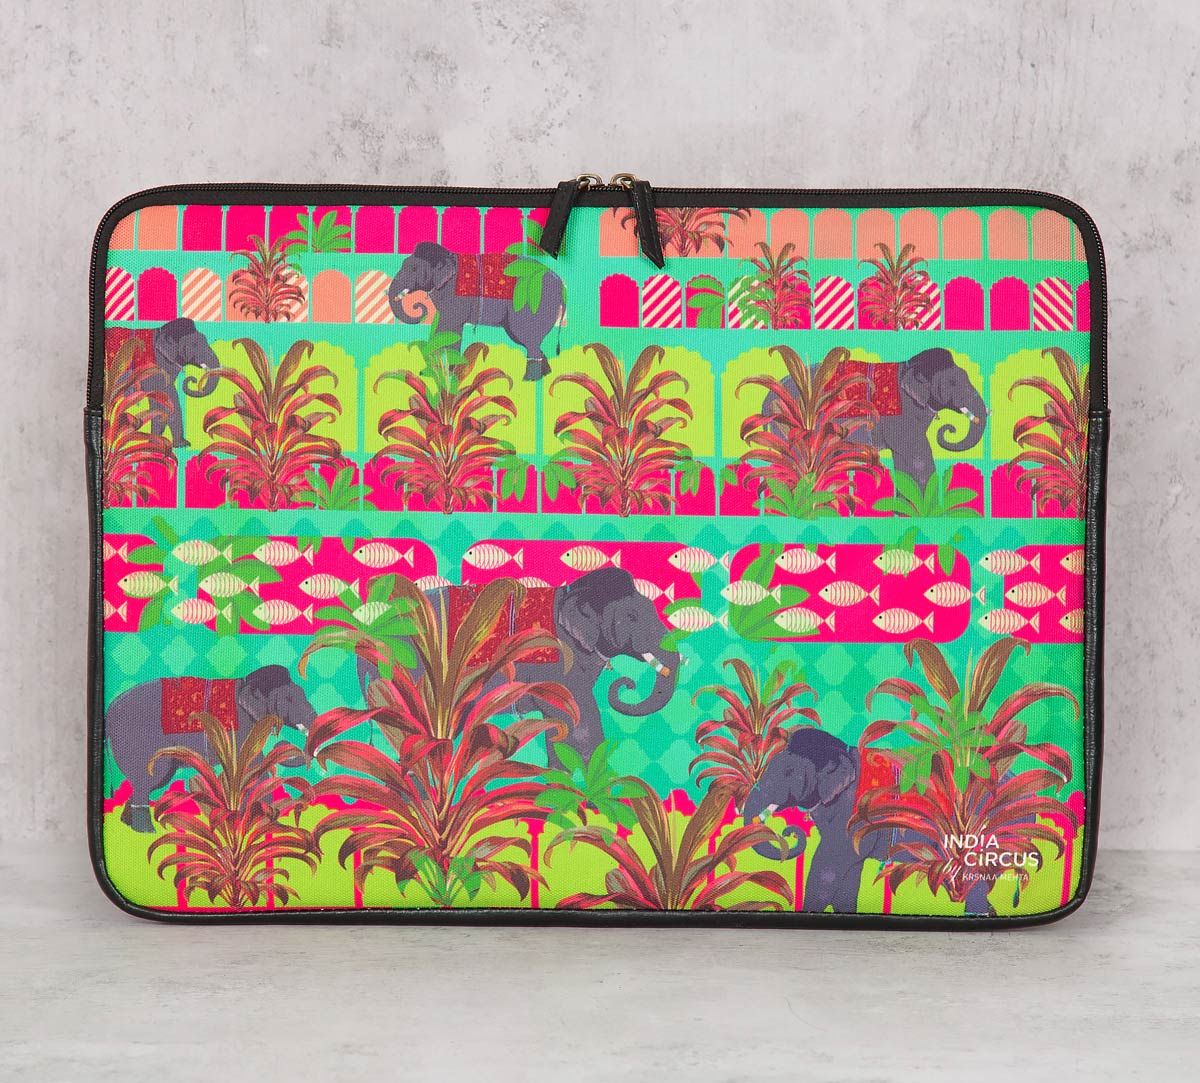 India Circus Countryside Tusker Laptop Sleeve